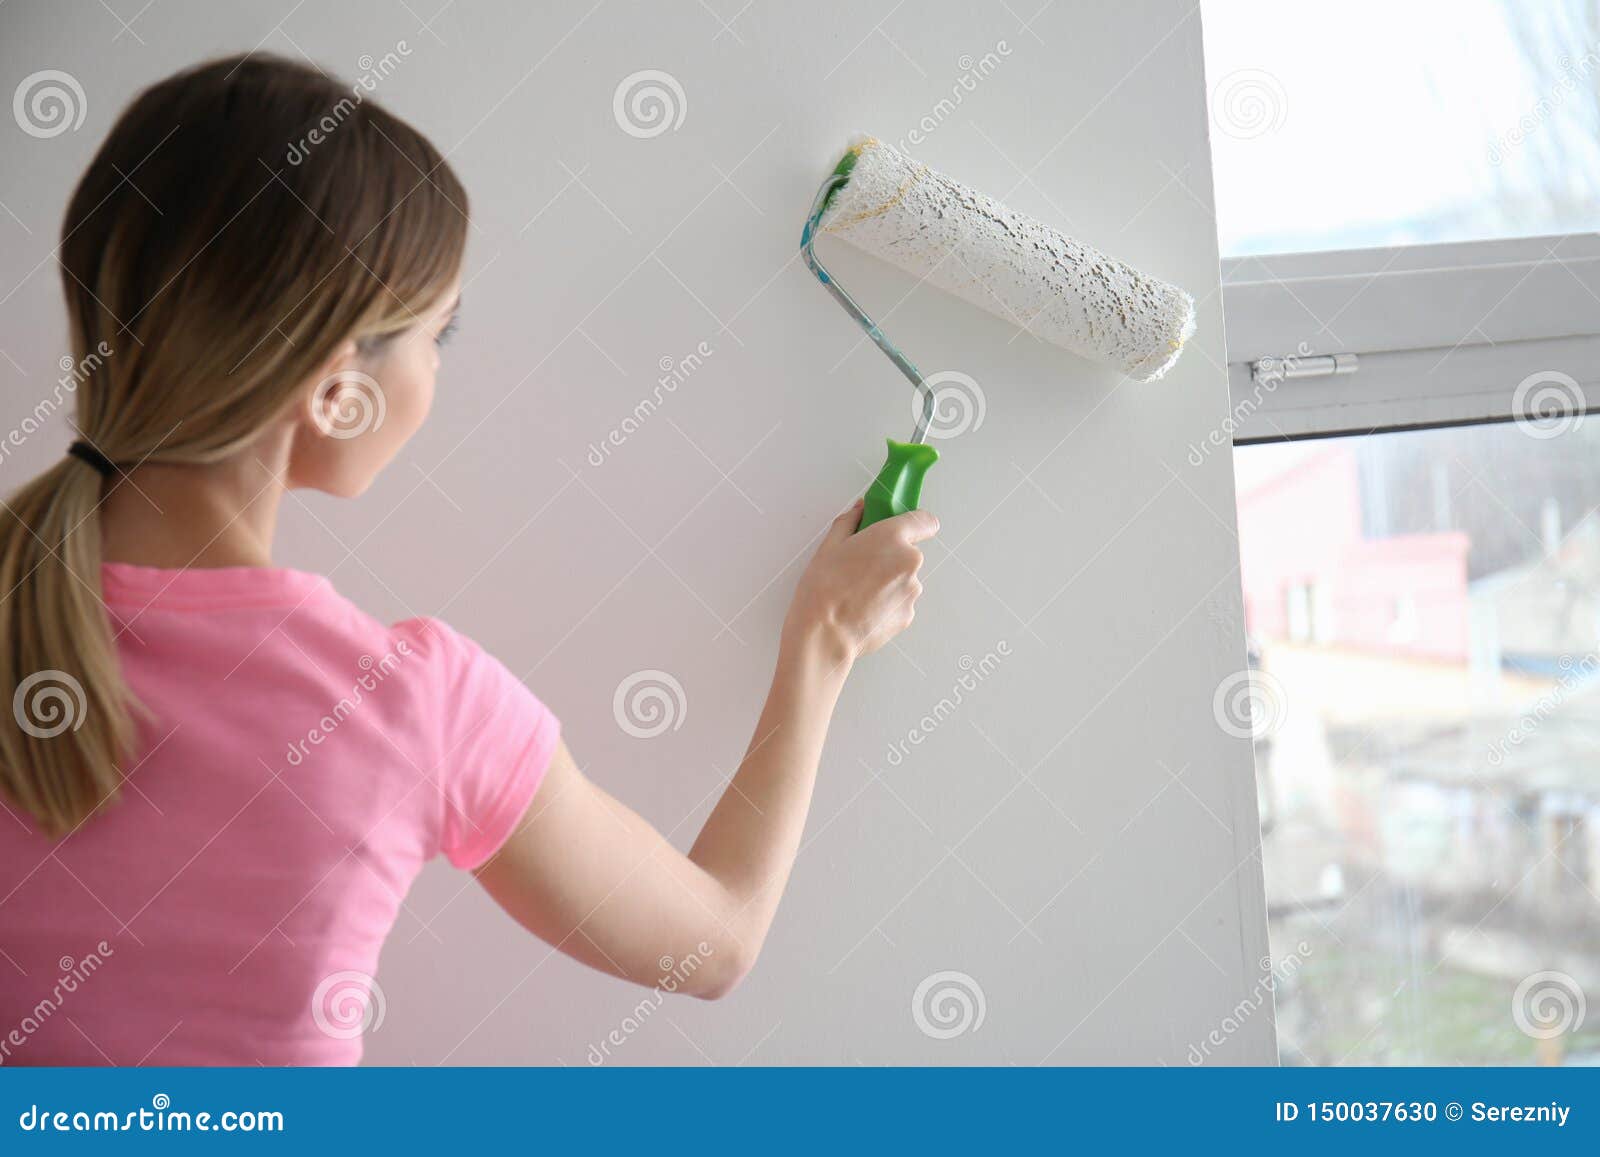 female painter using roller for refurbishing color of wall indoors